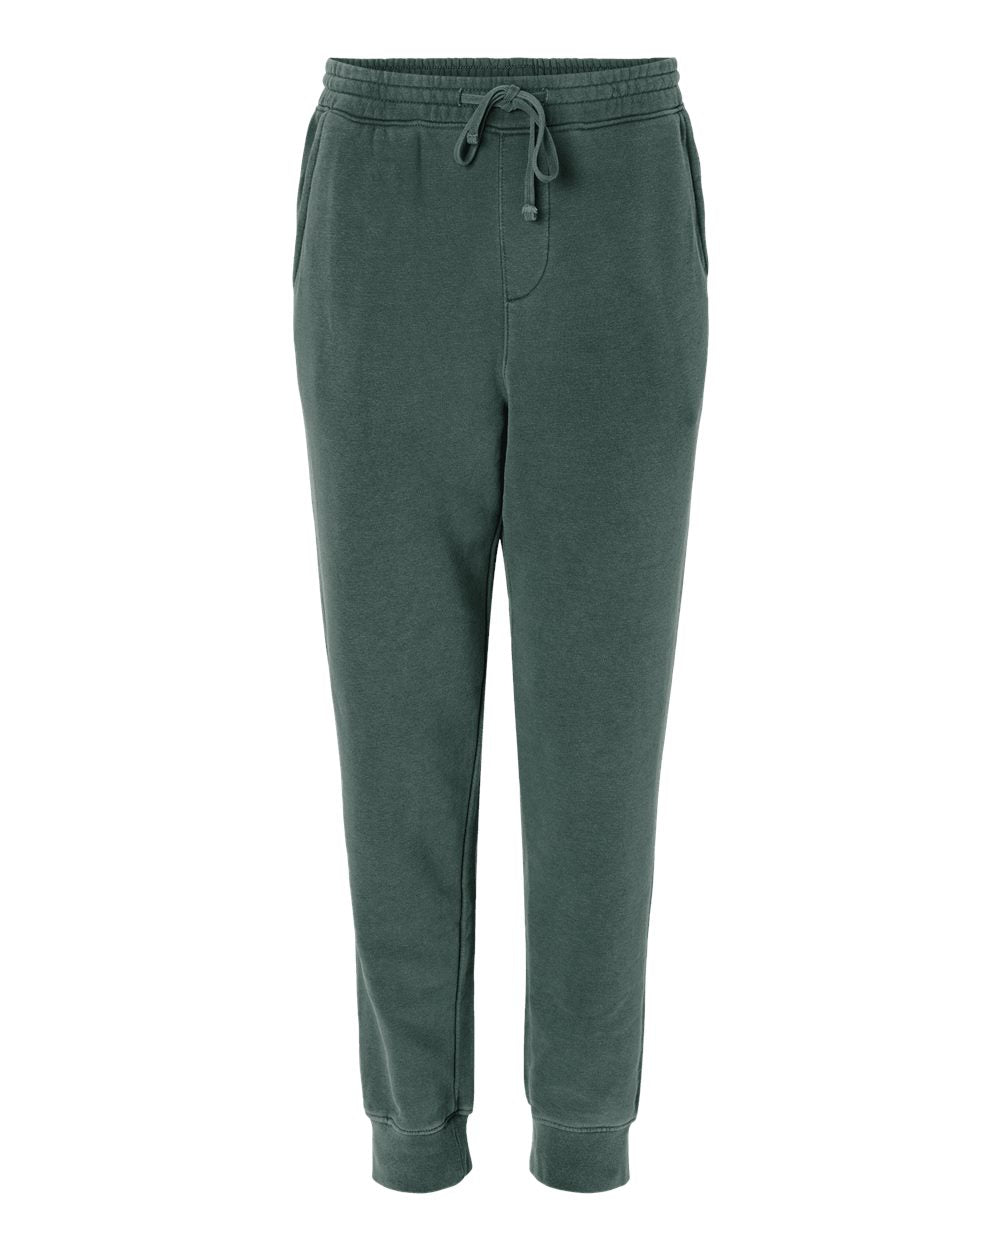 Independent Trading Co. | Pigment-Dyed Fleece Pants - MENS/UNISEX